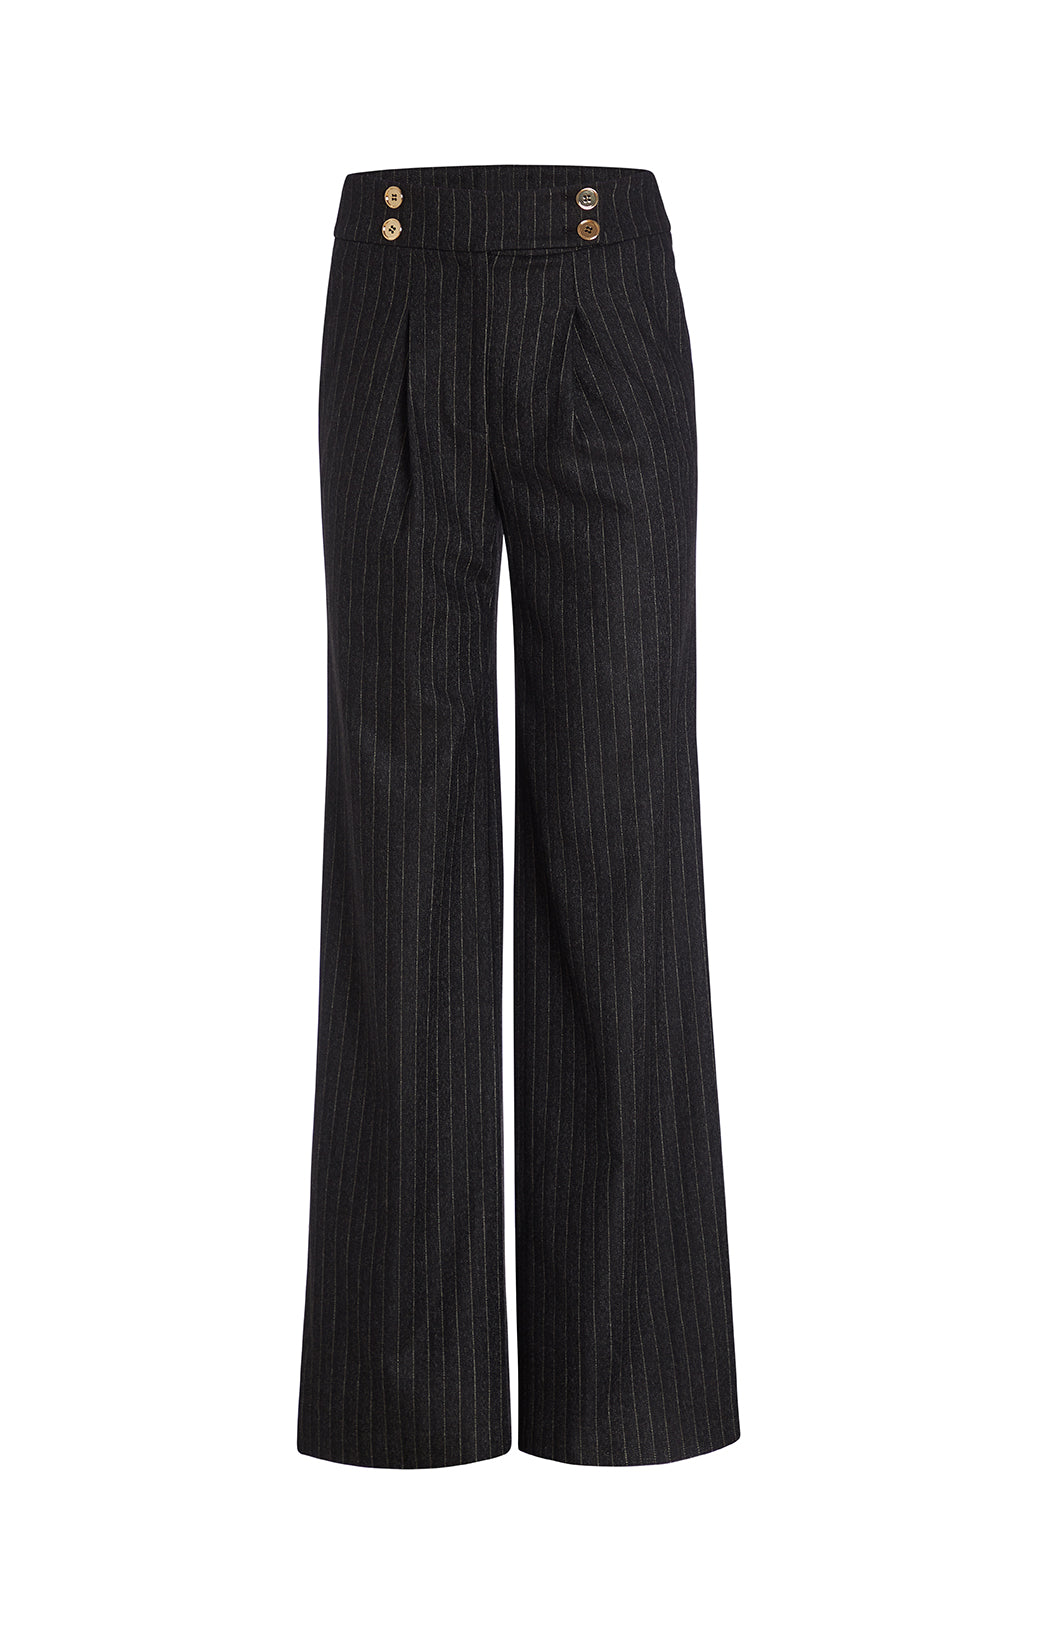 Time Off - Rib-Knit, Wide-Leg Pants -  Product Image